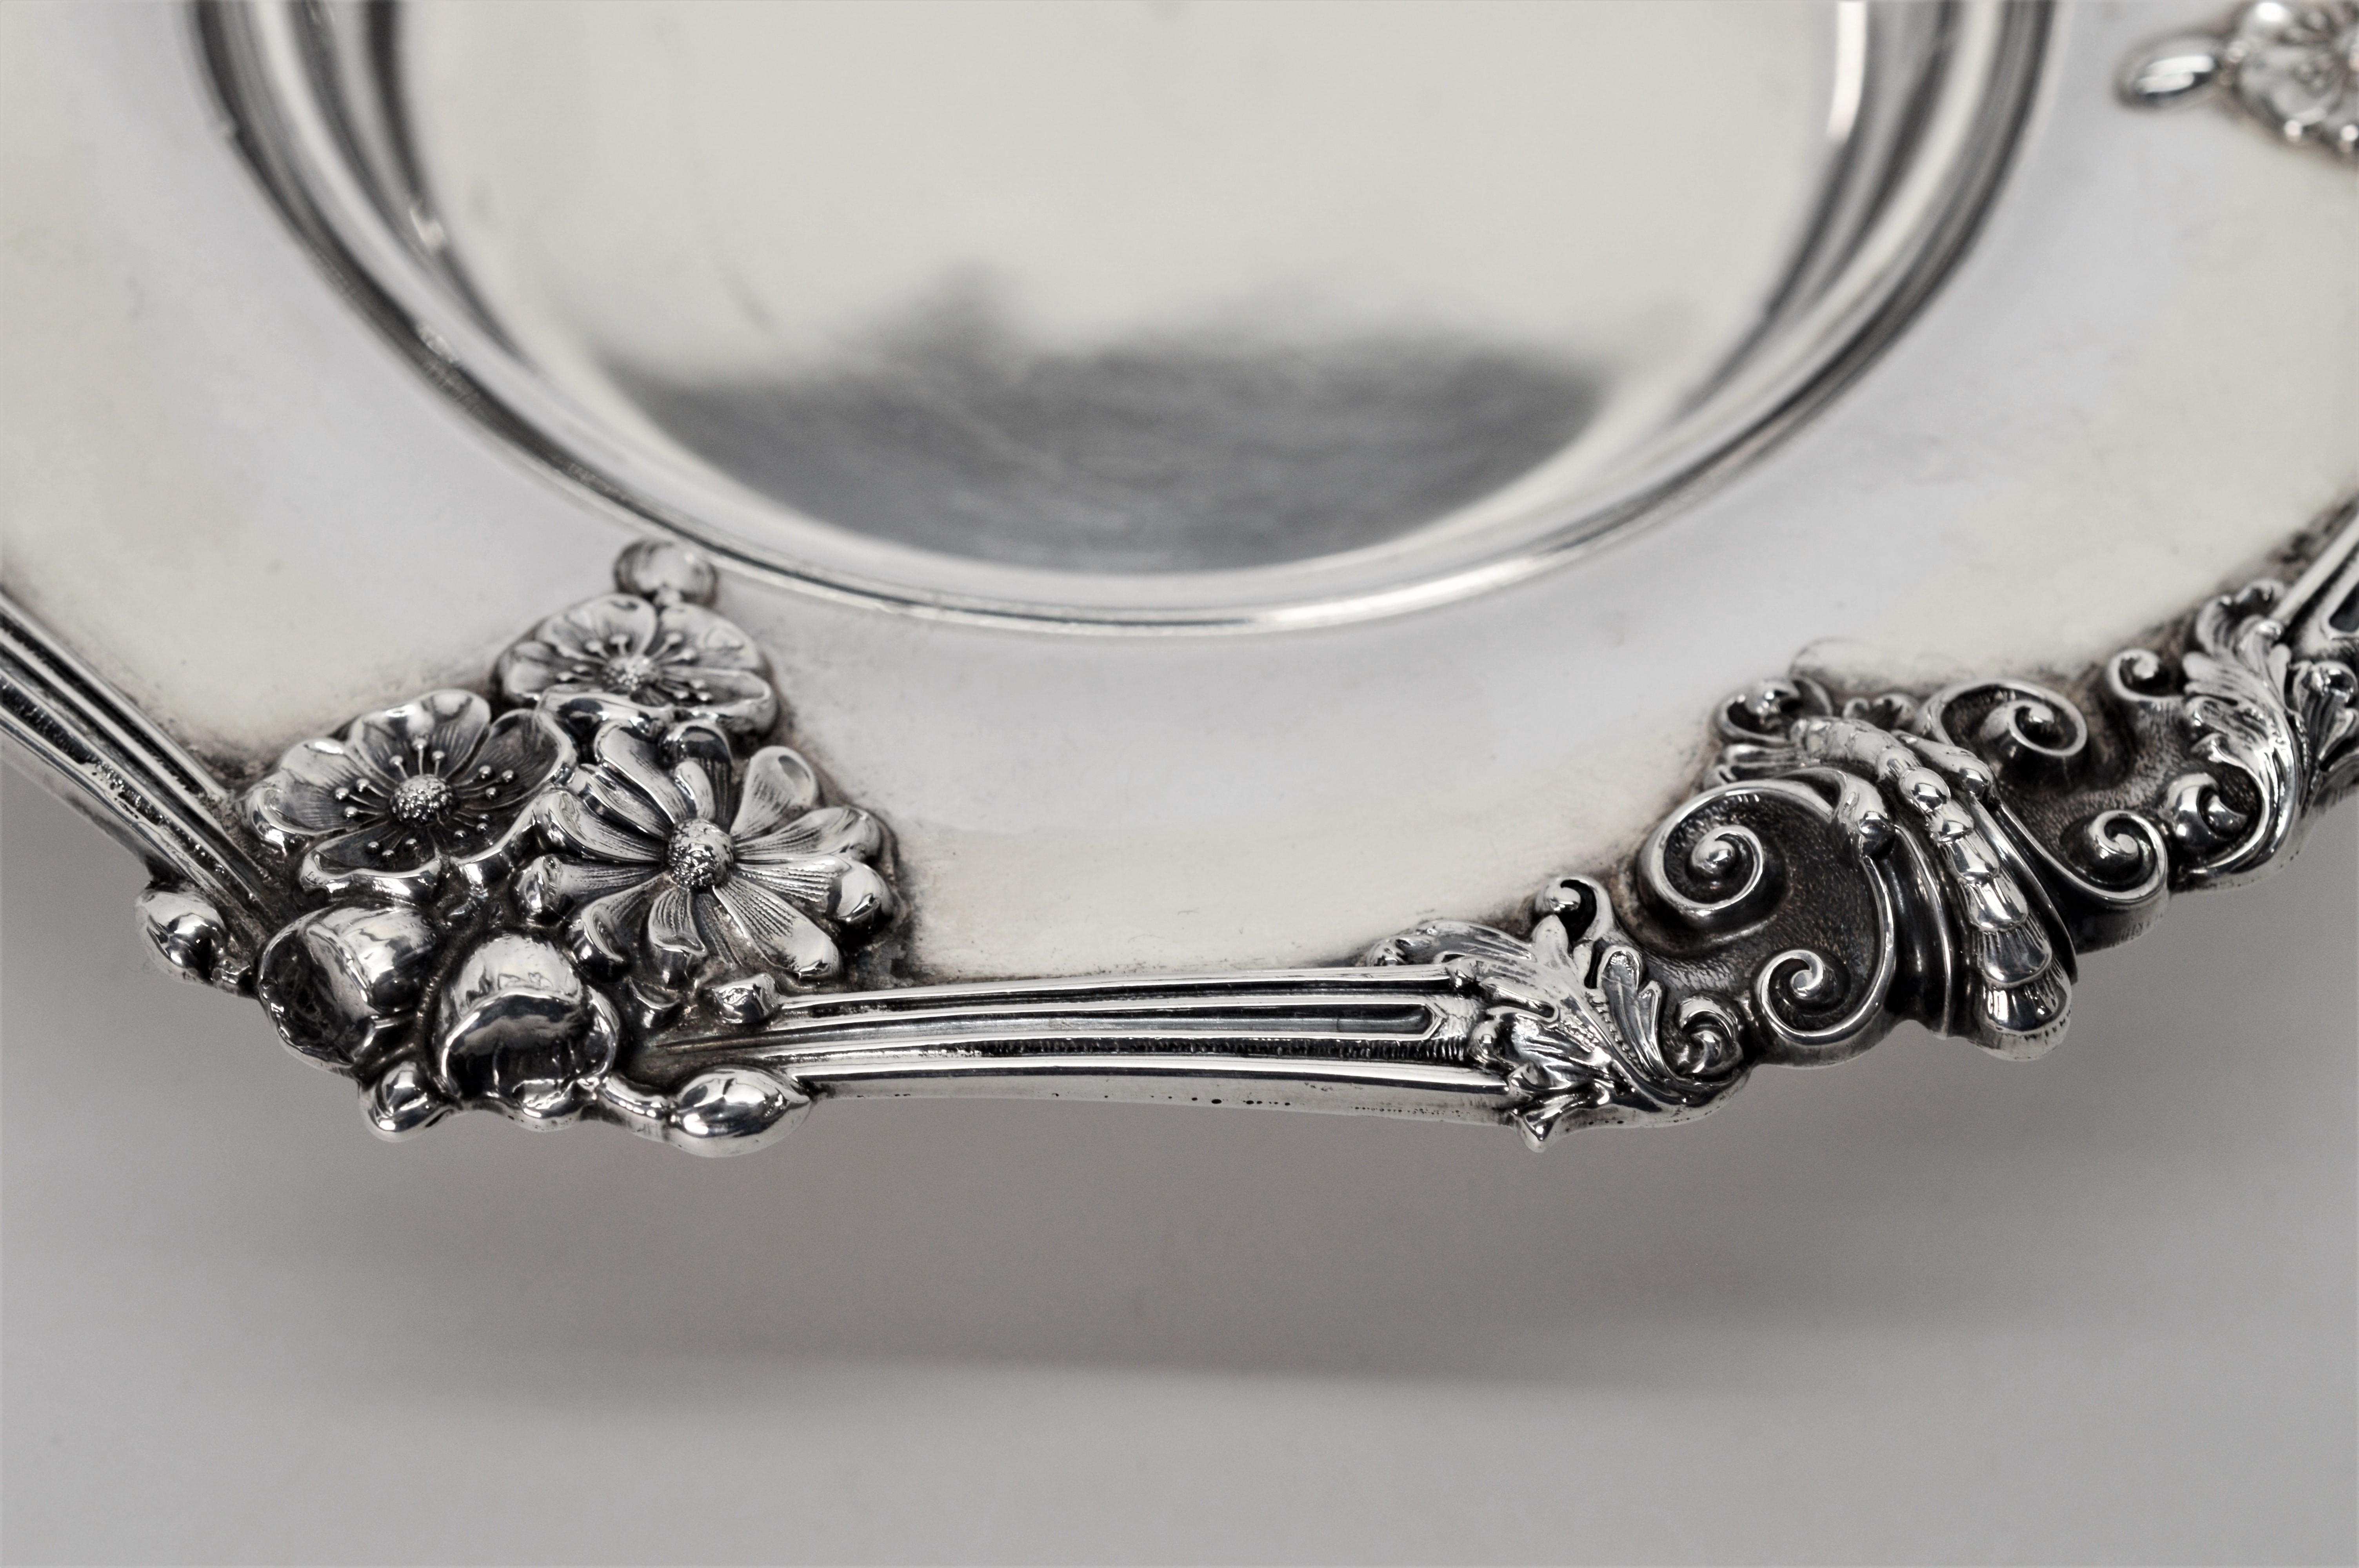 Theodore B. Starr Sterling Silver Bowl 2691. Overall measurement is 7-1/4 inches including a beautiful decorated floral patterned rim. The usable depth is 3- 1/2 diameter by 3/4 inch deep. The decorative rim is 1-1/2 inch wide.  New York City circa